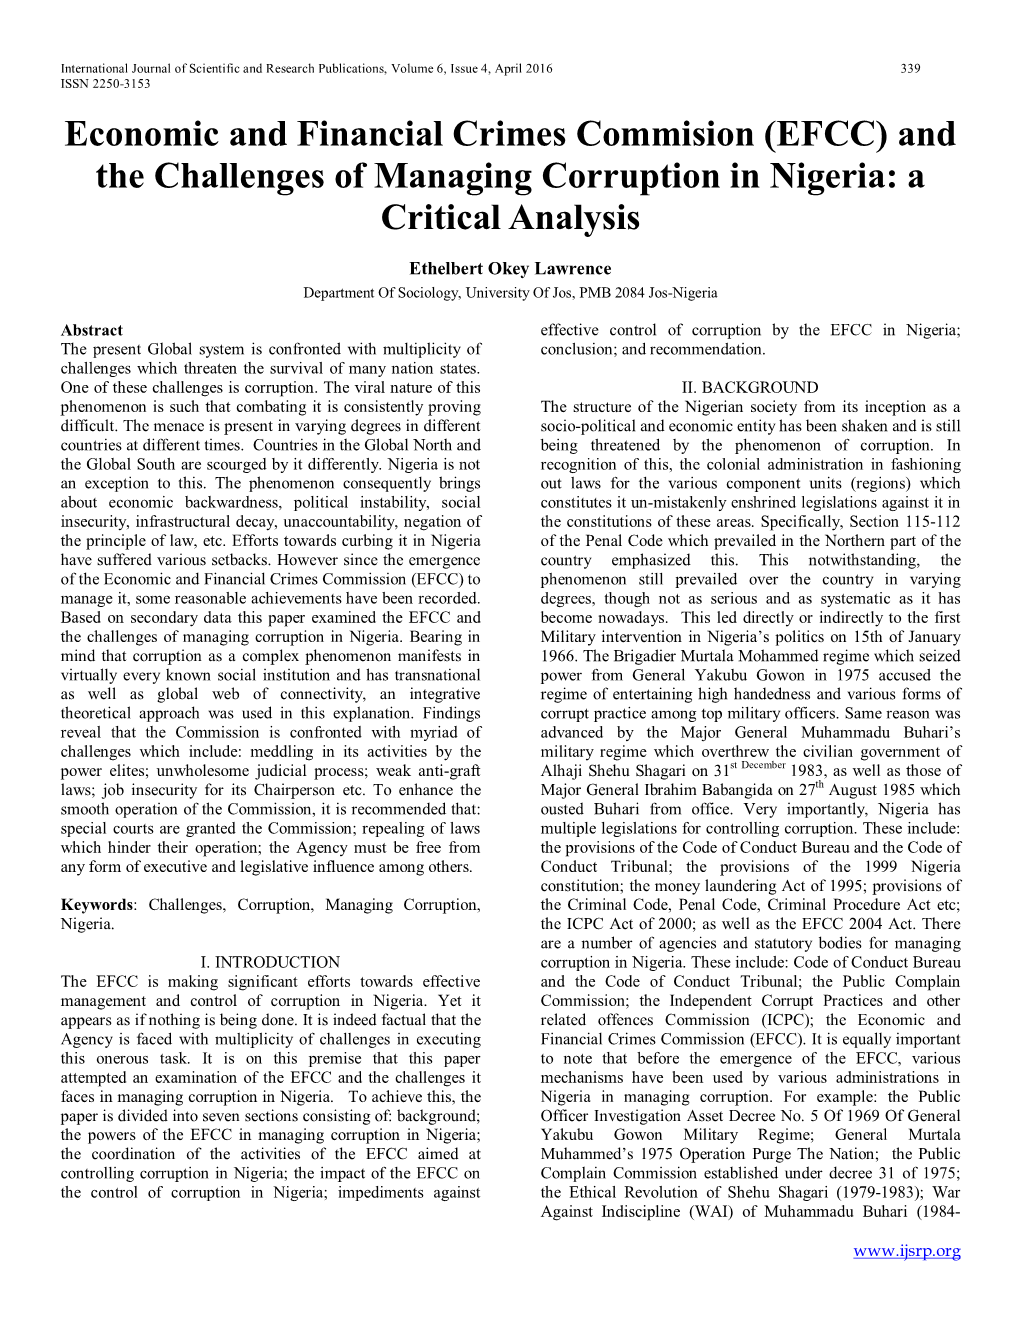 Economic and Financial Crimes Commision (EFCC) and the Challenges of Managing Corruption in Nigeria: a Critical Analysis